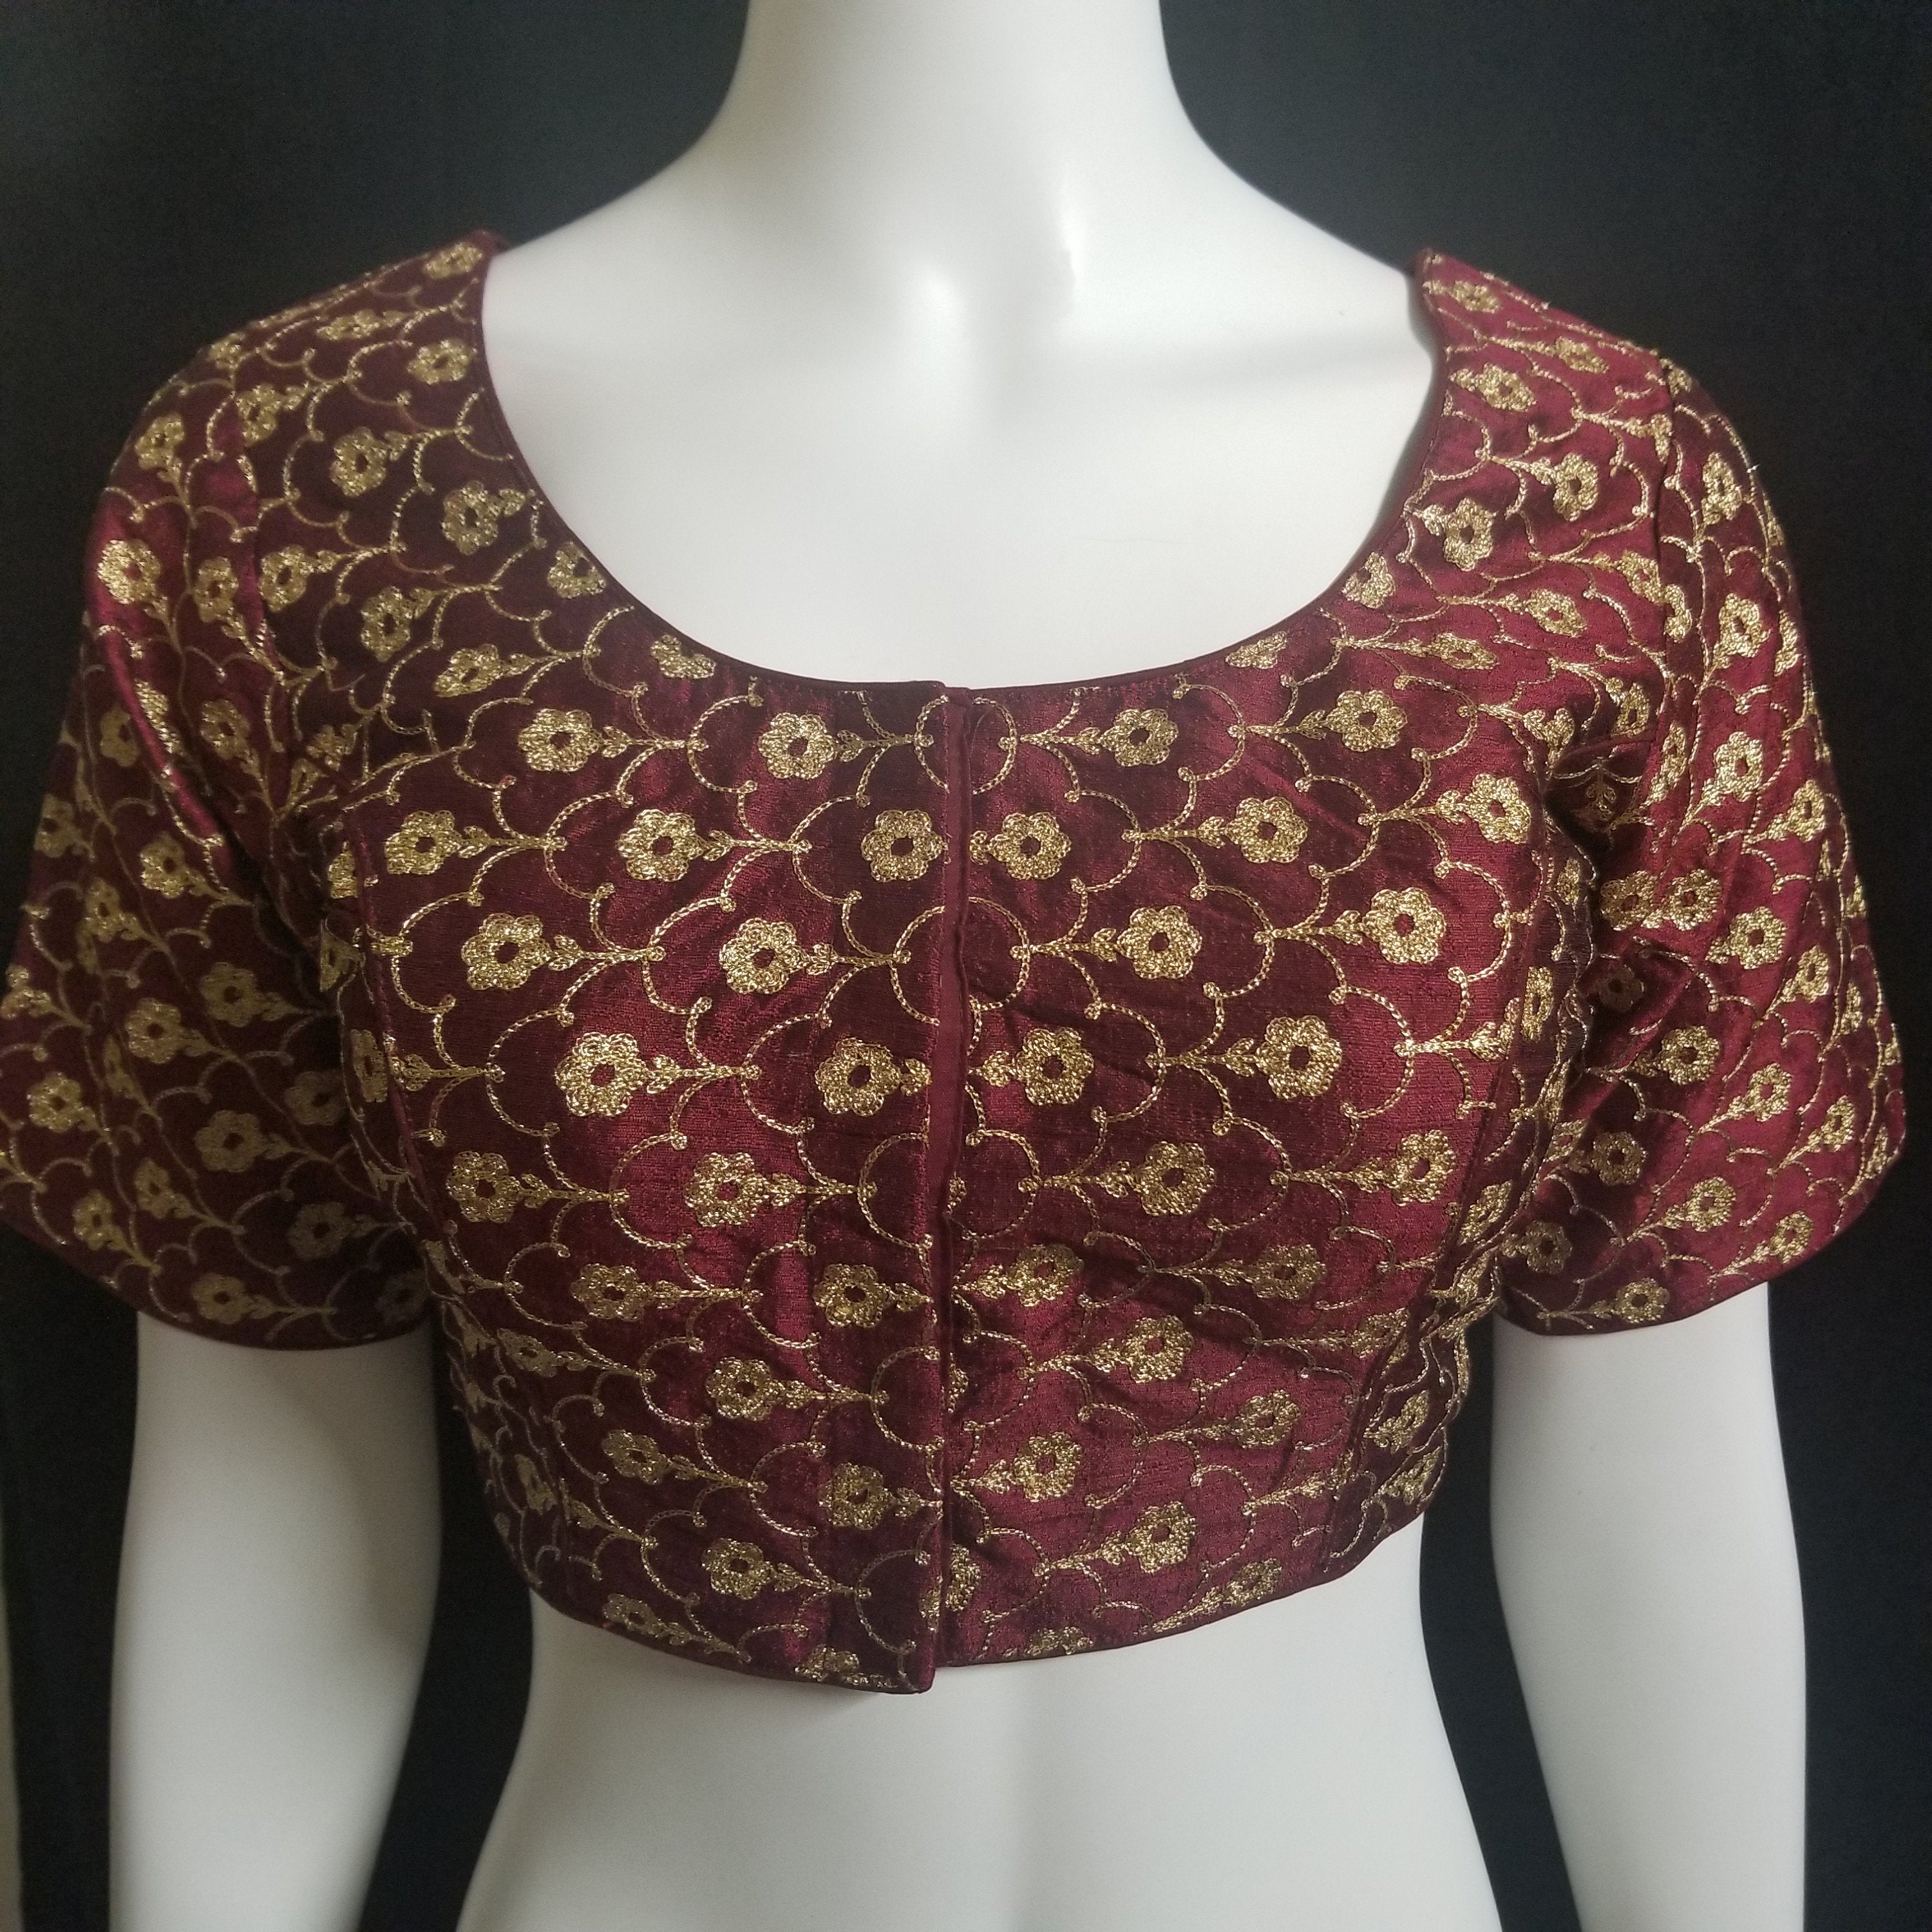 Readymade Saree Blouse - Maroon with golden flower embroidery Blouse - Princess cut padded - size 38" (can alter 34" - 42")